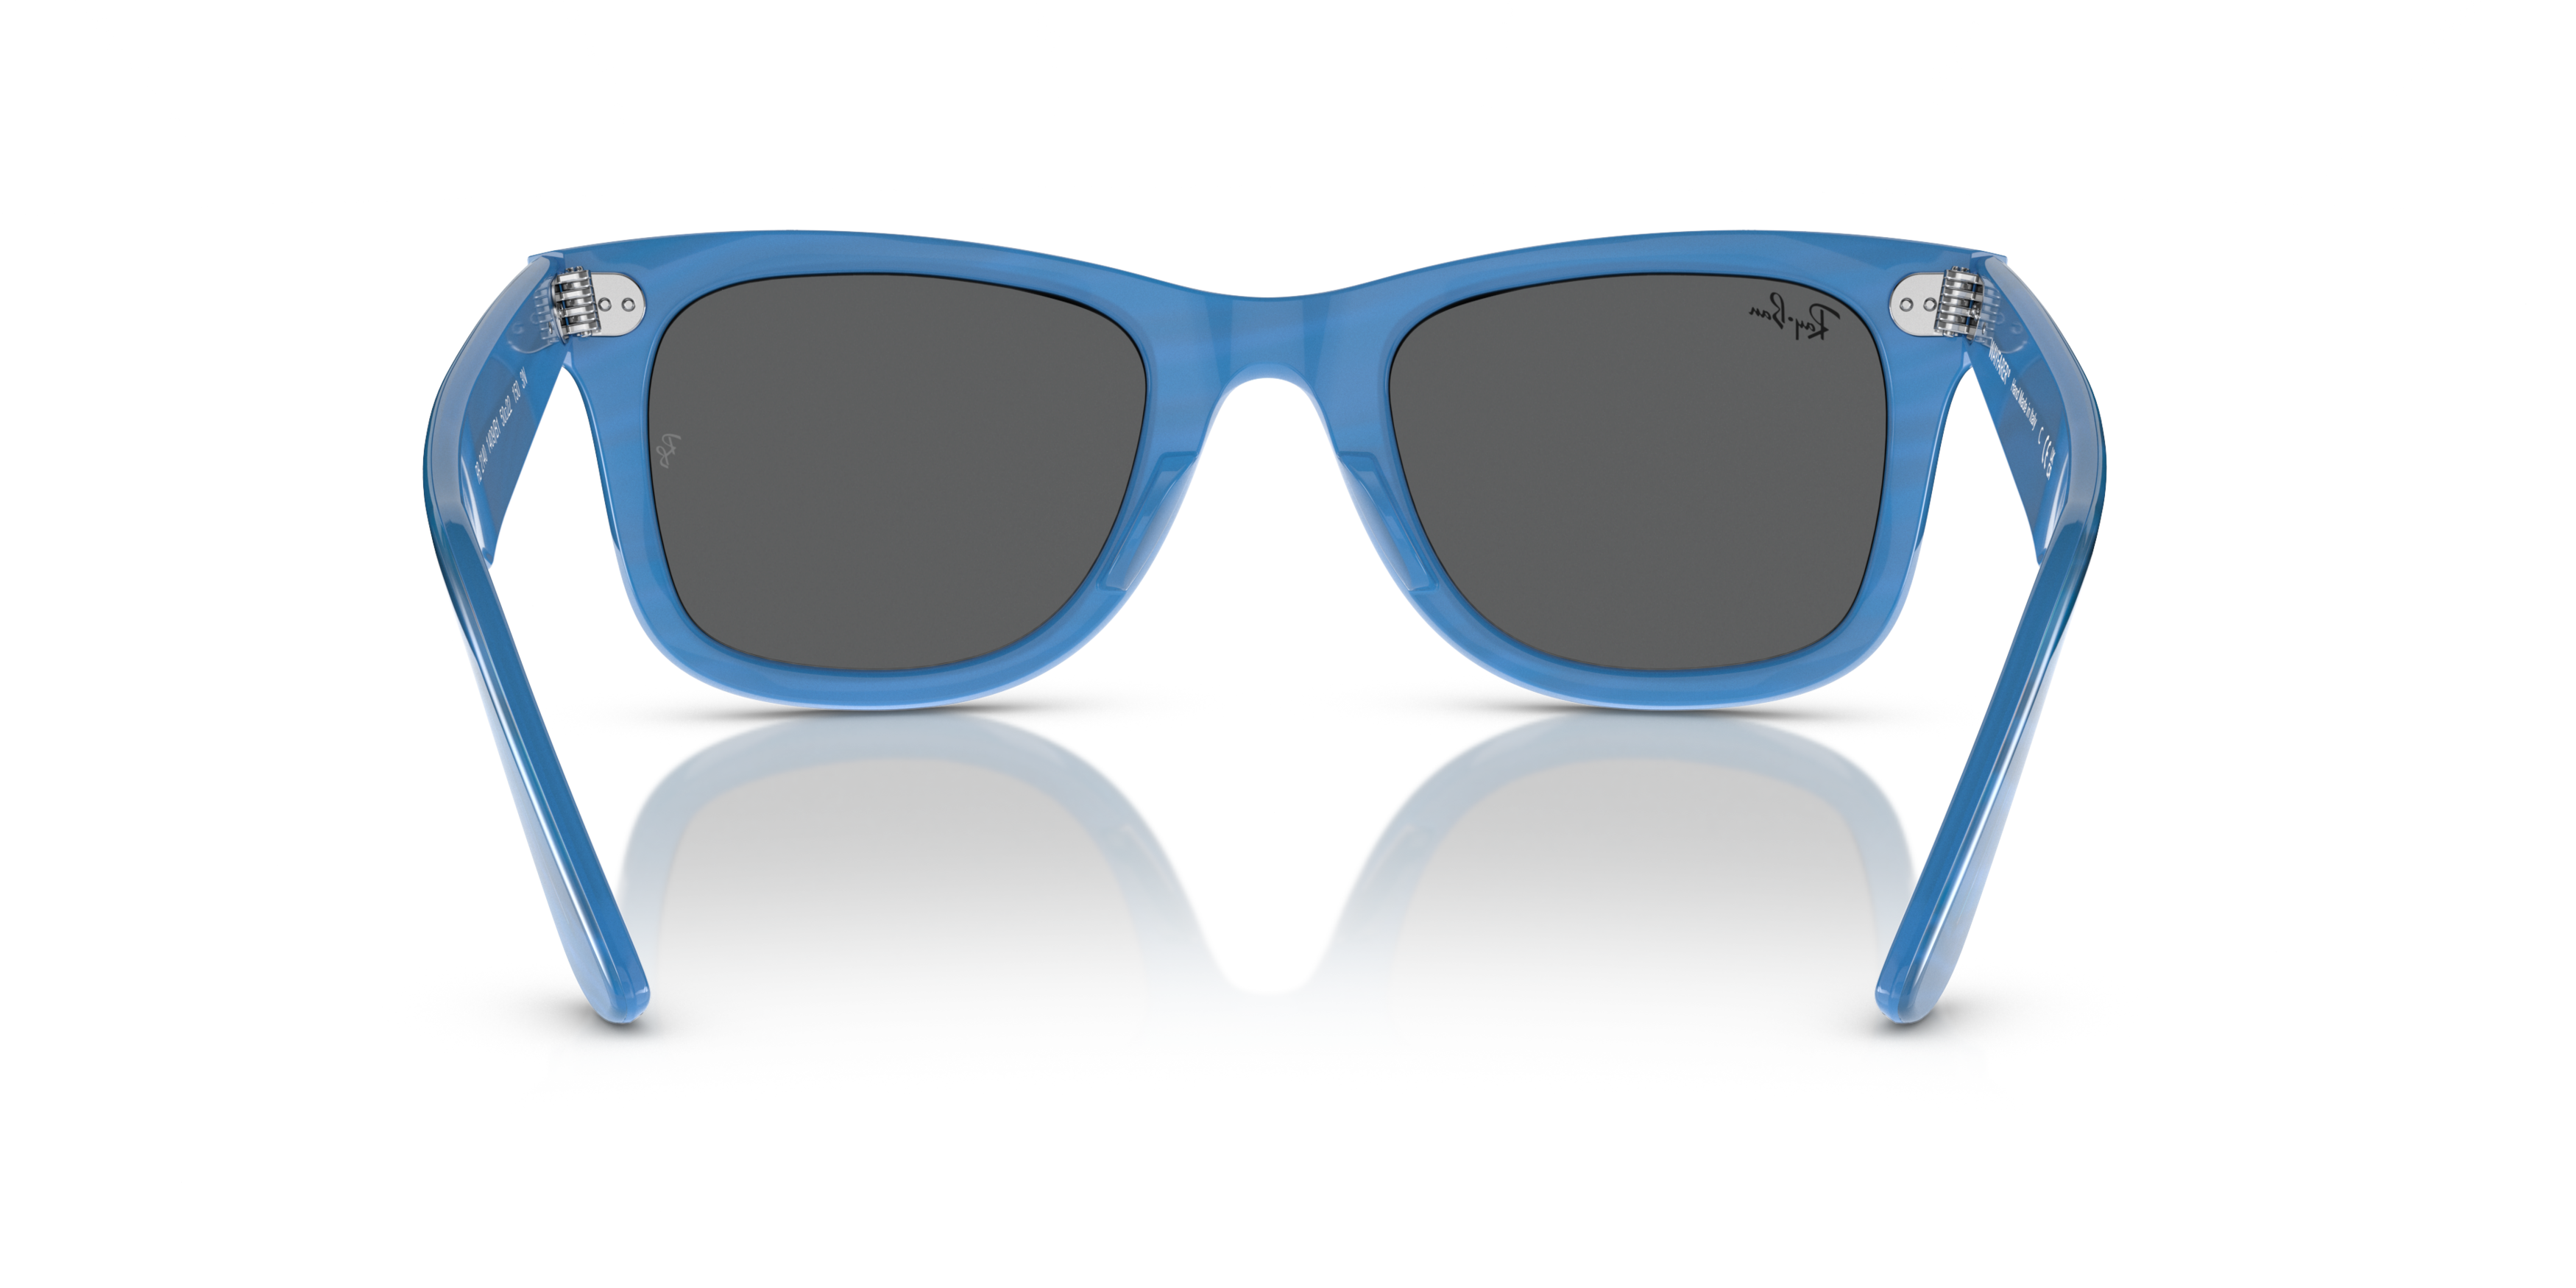 [products.image.detail02] Ray-Ban Wayfarer RB 2140 Sunglasses